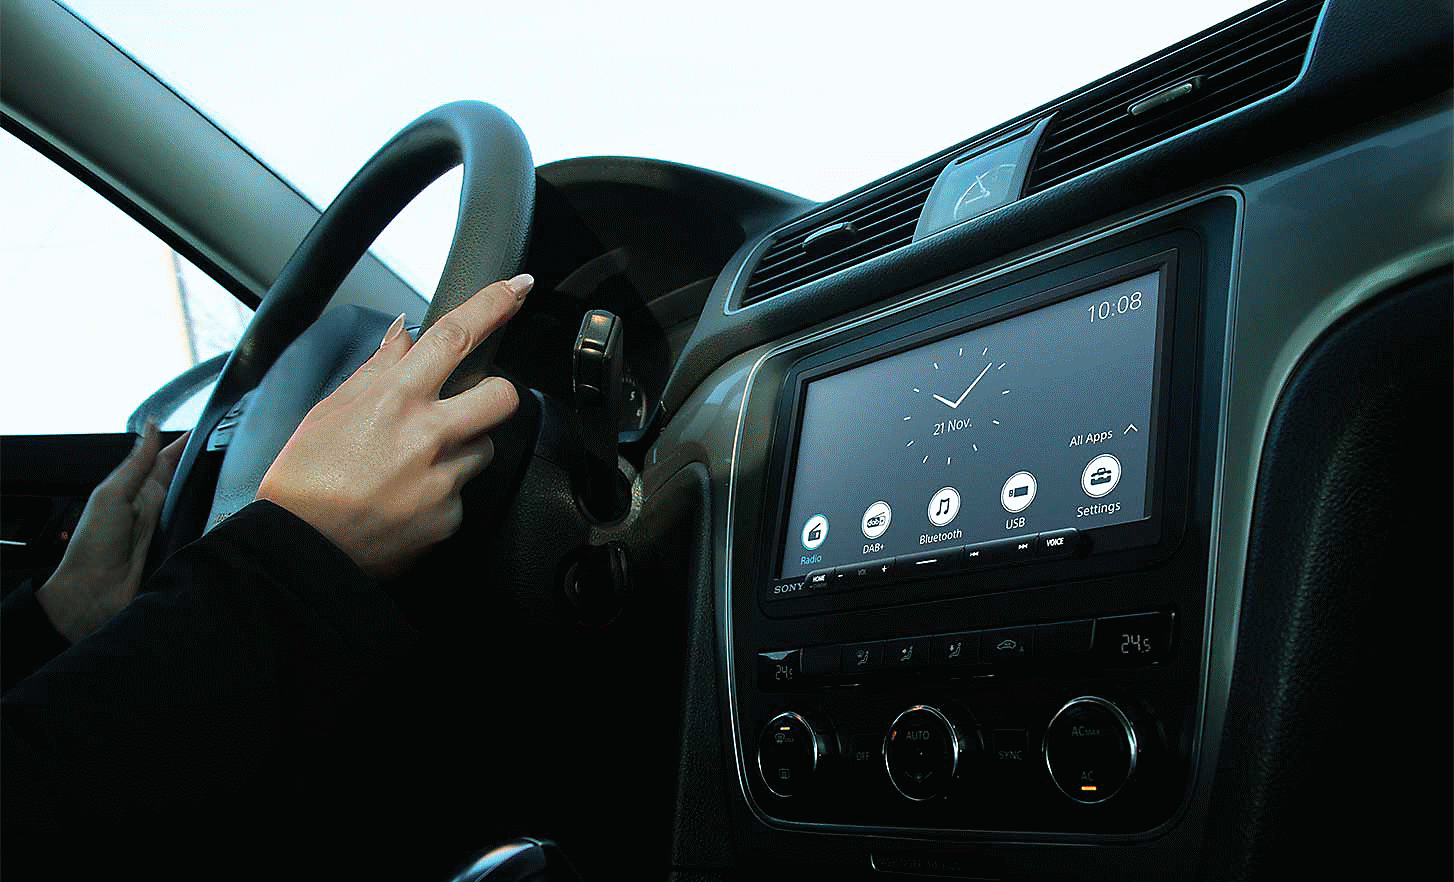 Image of the XAV-AX4050 in a dashboard with a clock and multiple buttons on-screen